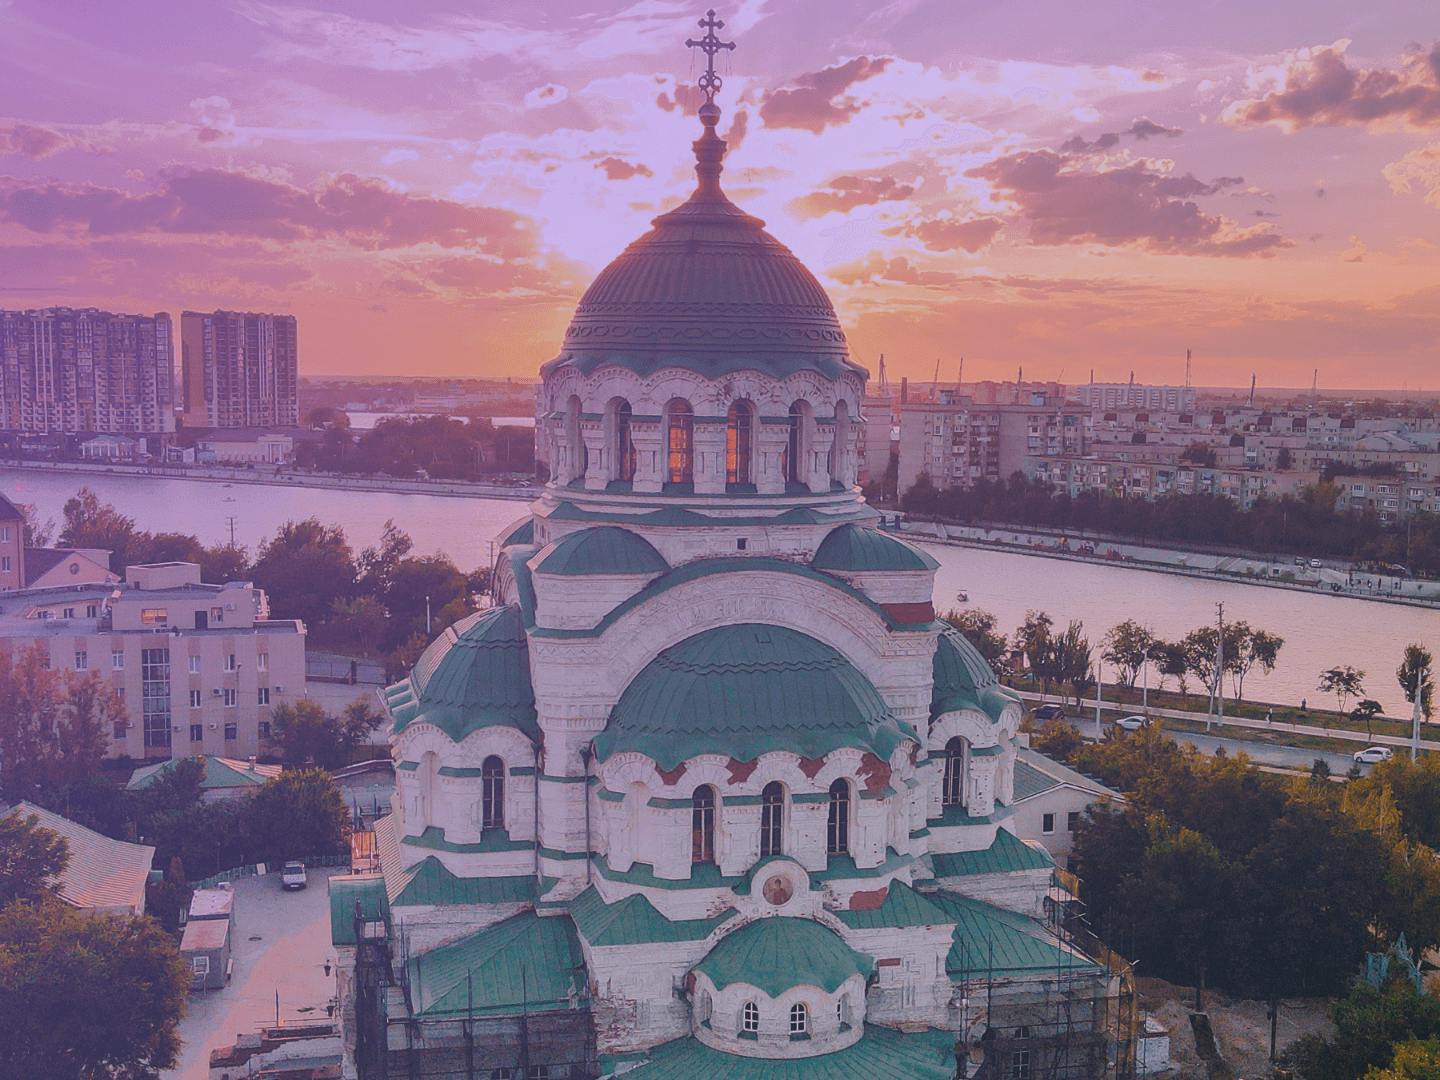 Alexander Nevsky Cathedral at sunset in Bulgaria.